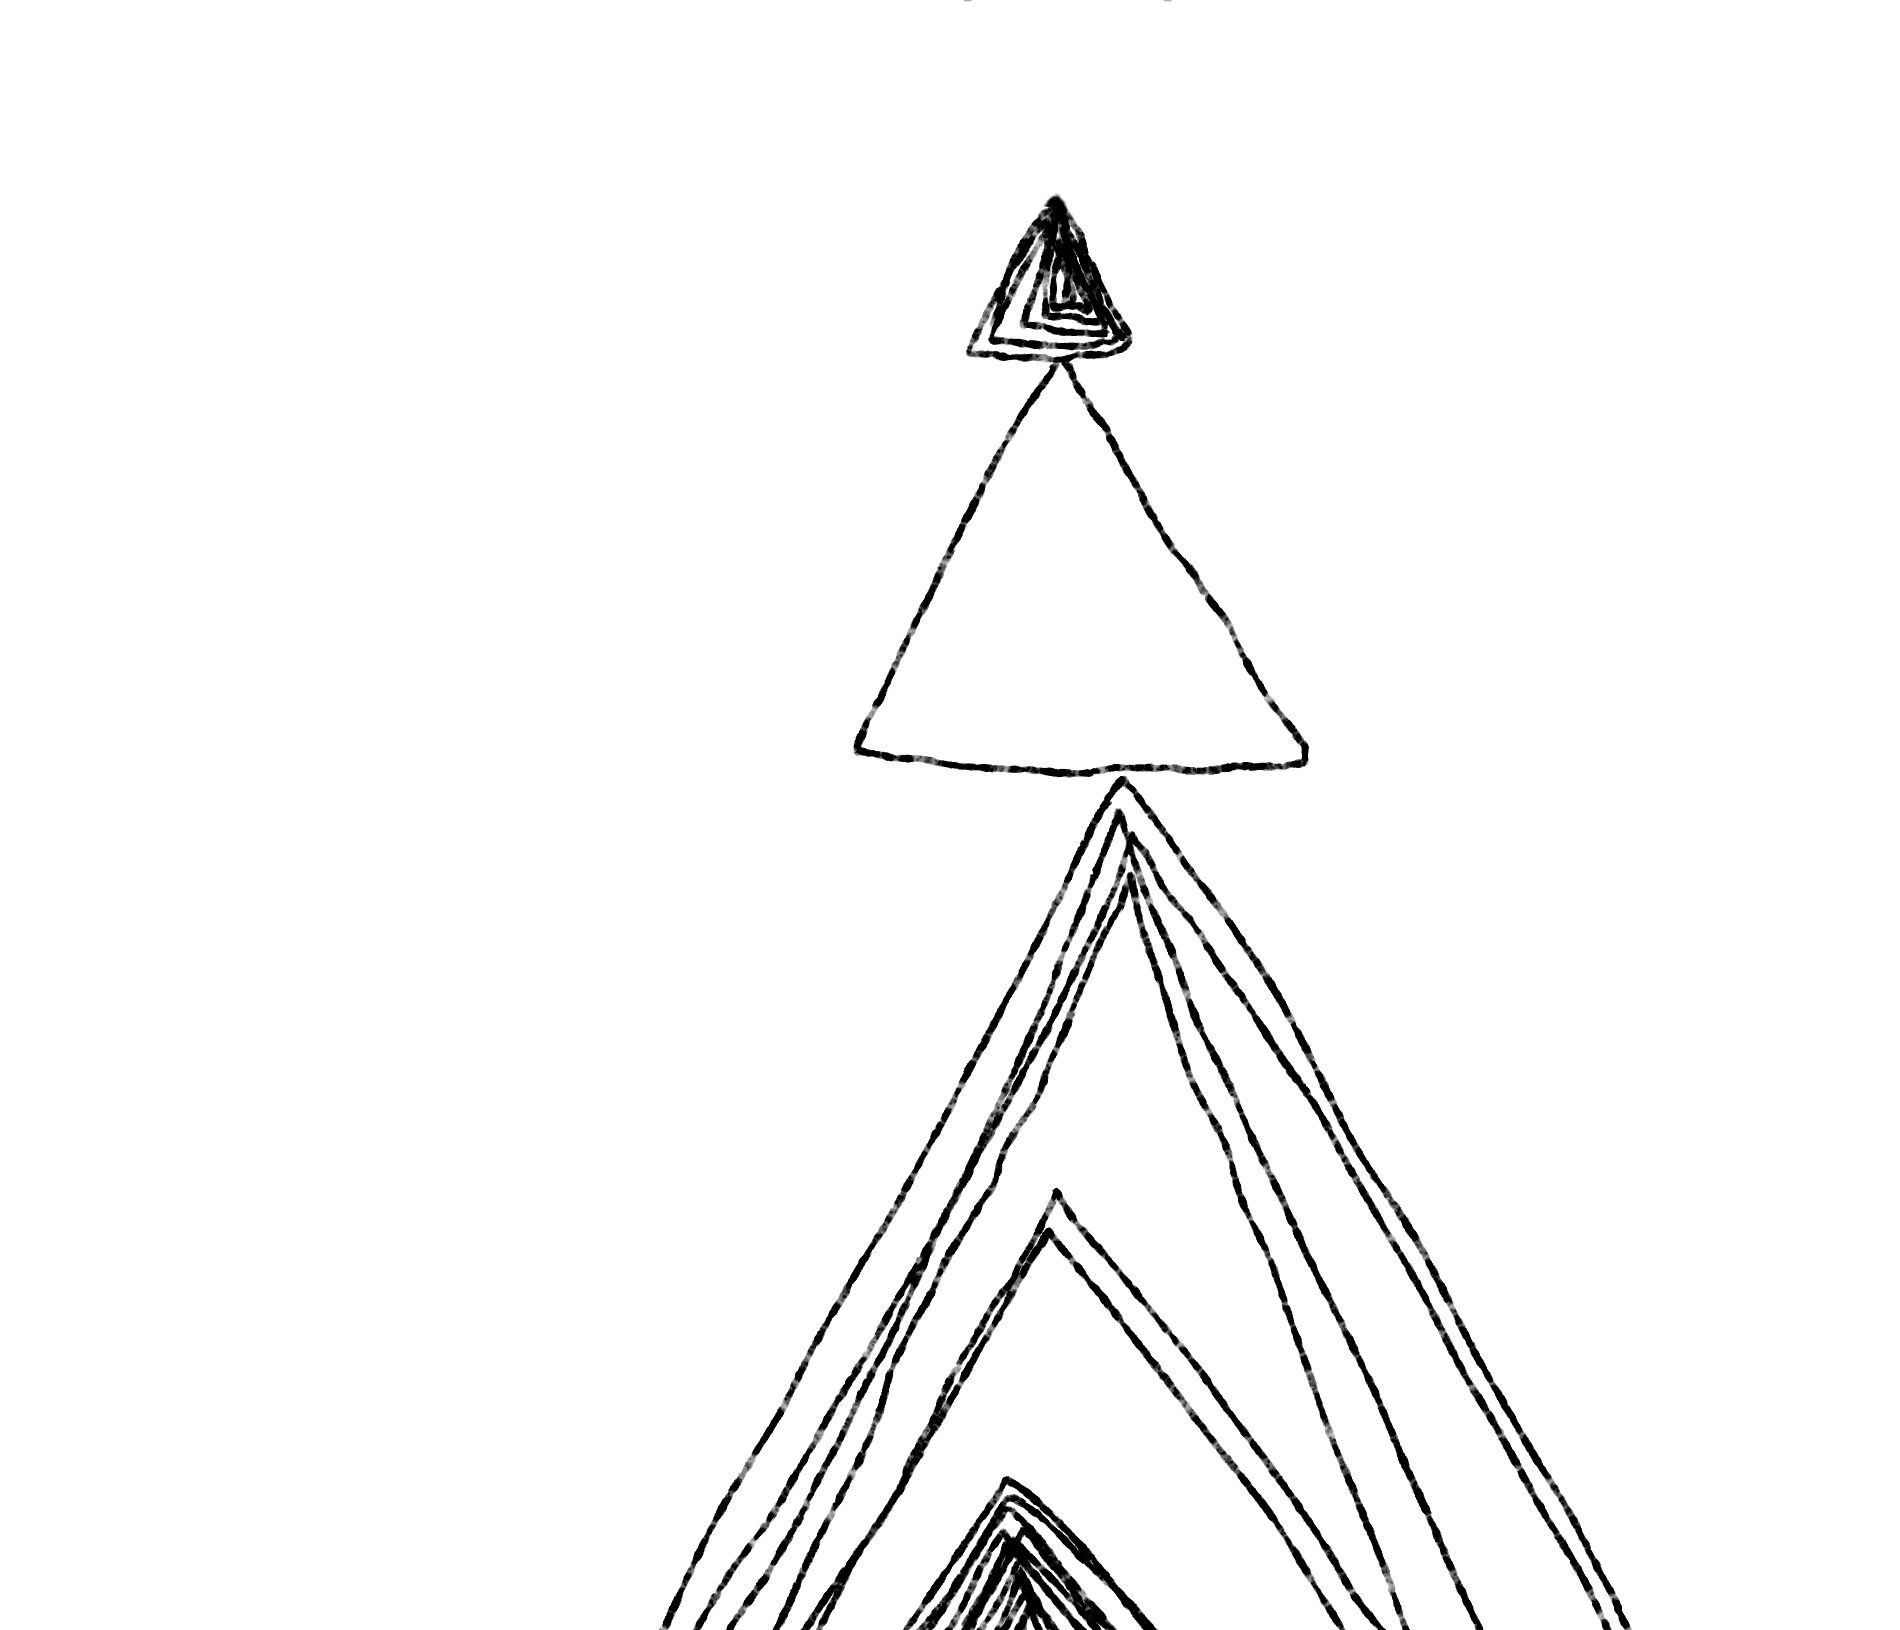 Stacked triangle illustration